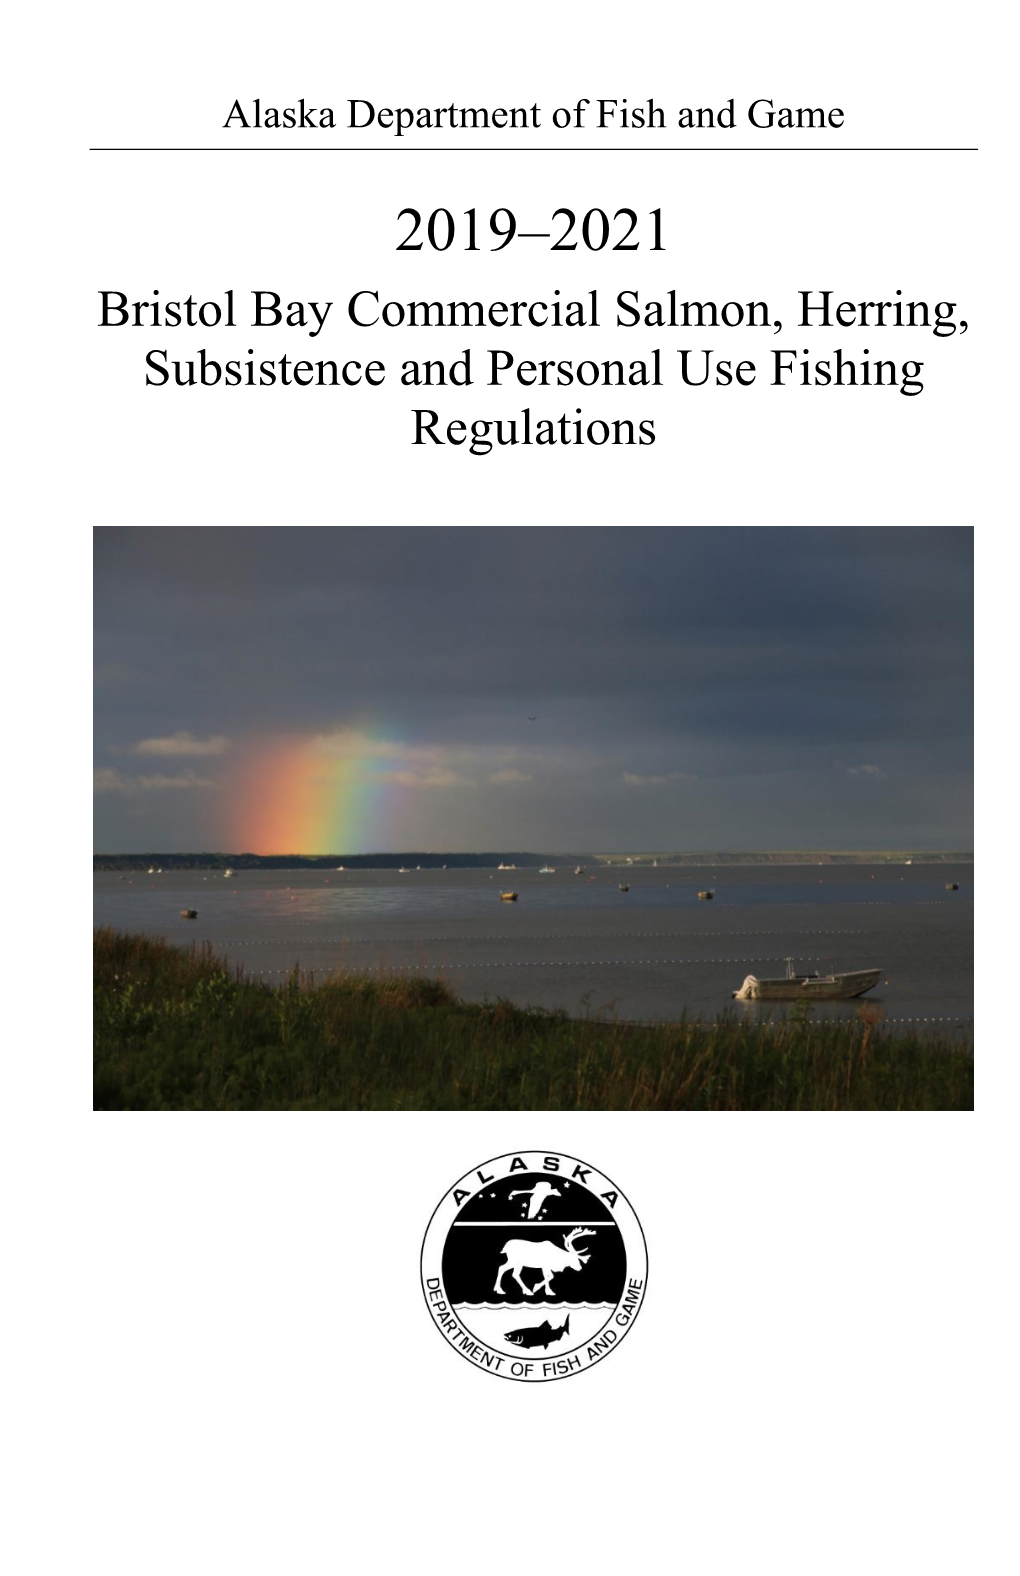 2019-2021 Bristol Bay Commercial Salmon, Herring, Subsistence And